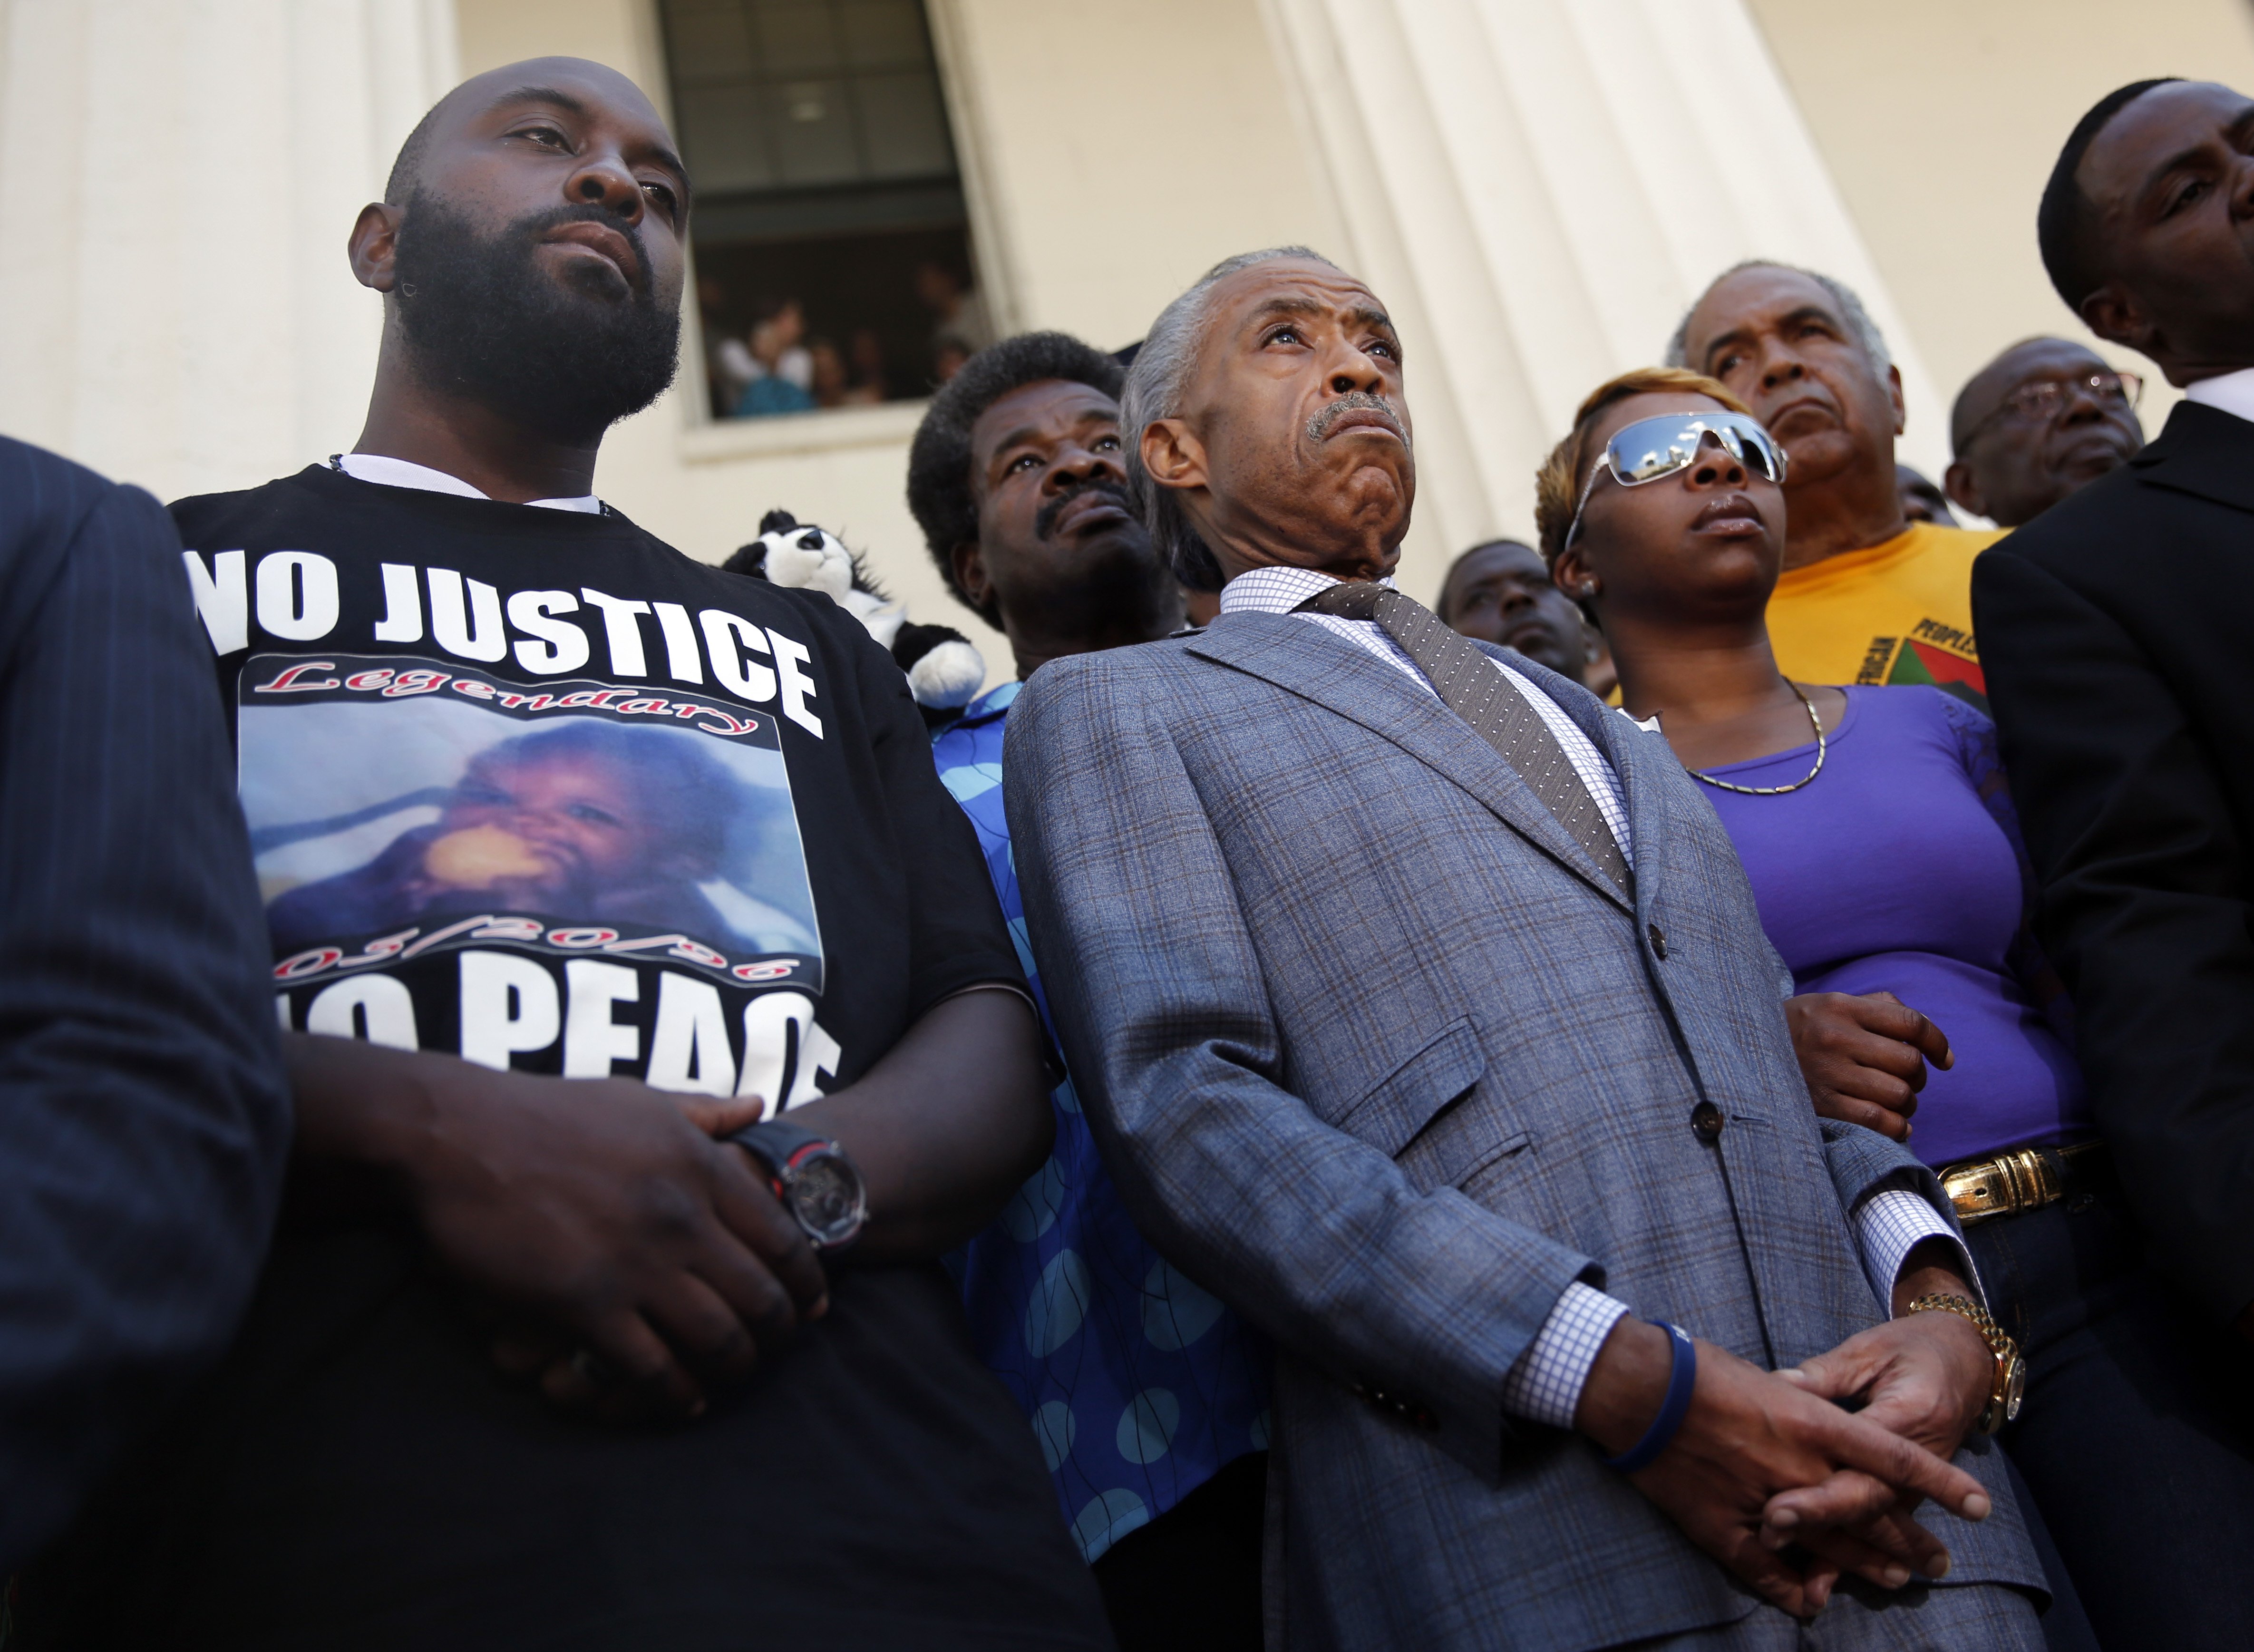 From left: Michael Brown, Sr., Reverend Al Sharpton, and Lesley McSpadden during a news conference outside the Old Courthouse in St. Louis on Aug. 12, 2014.